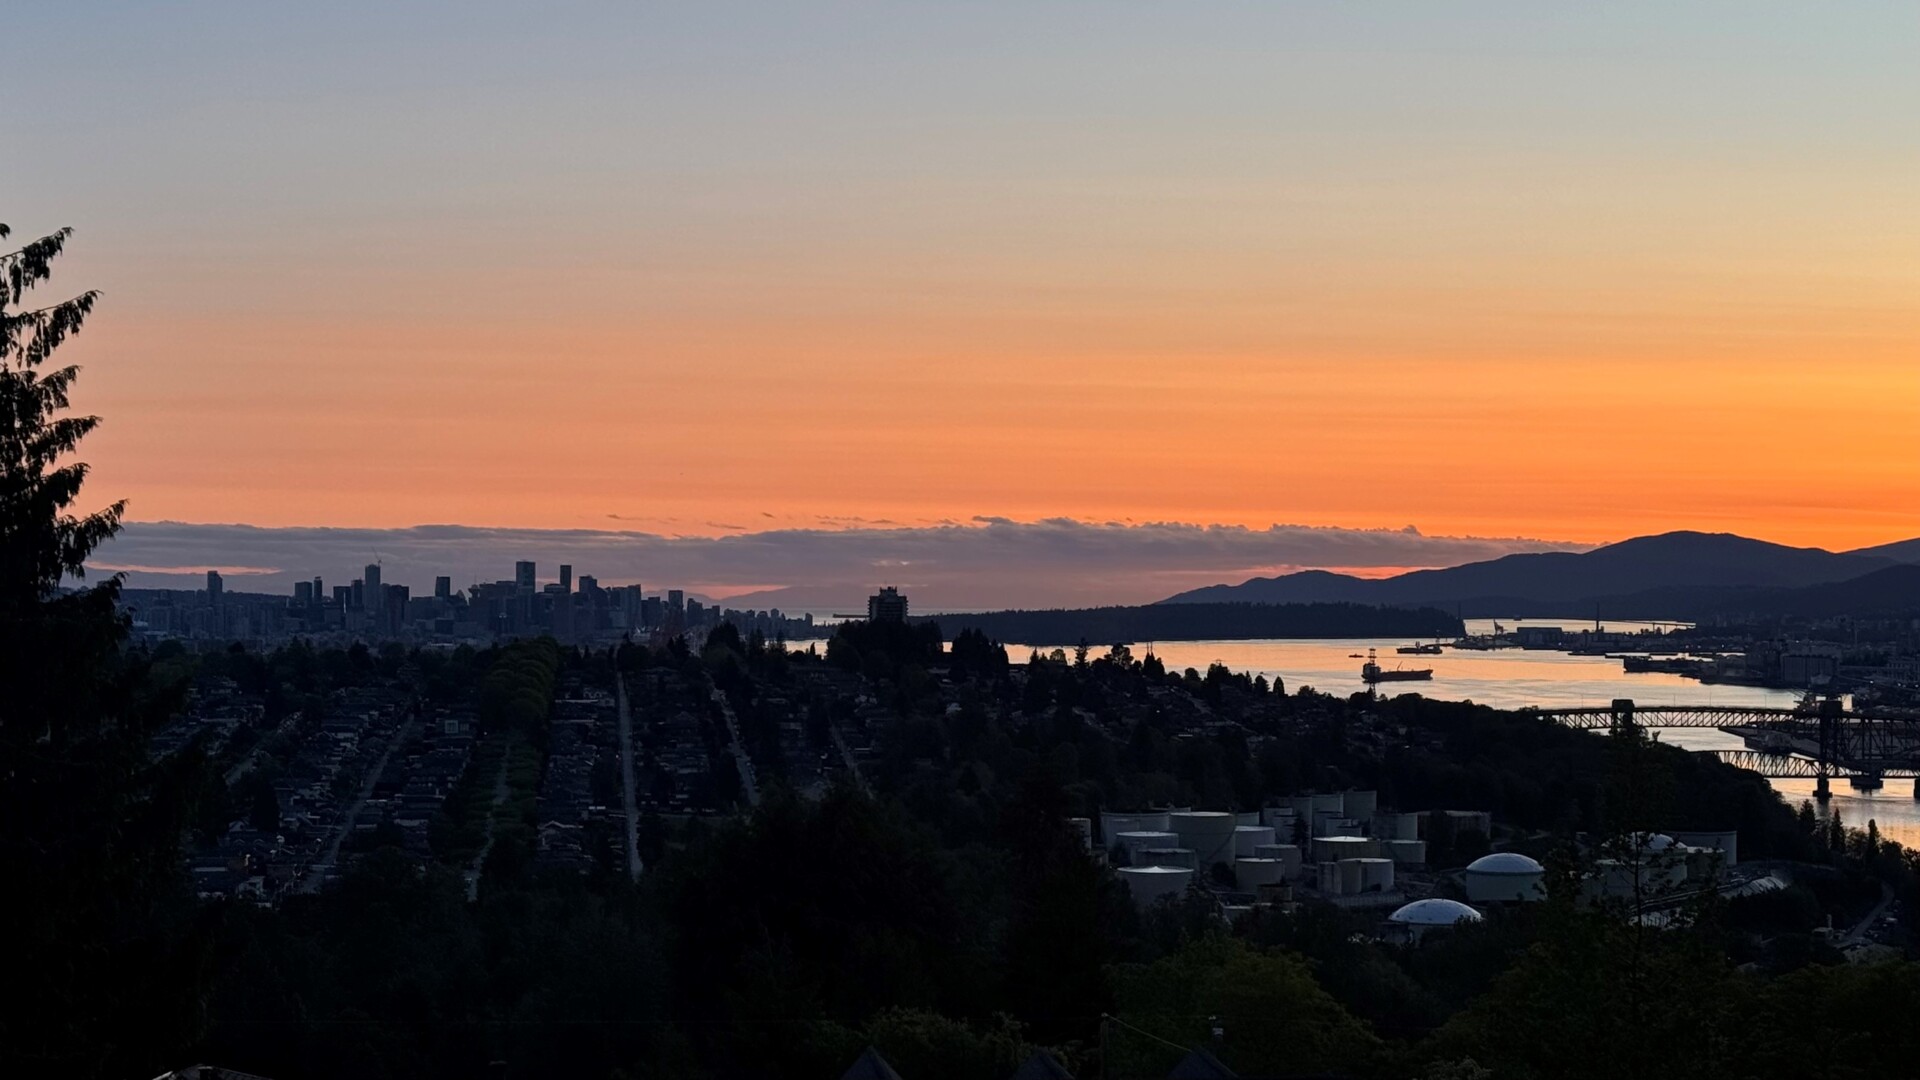 Summer Solstice brings warm weather to Vancouver